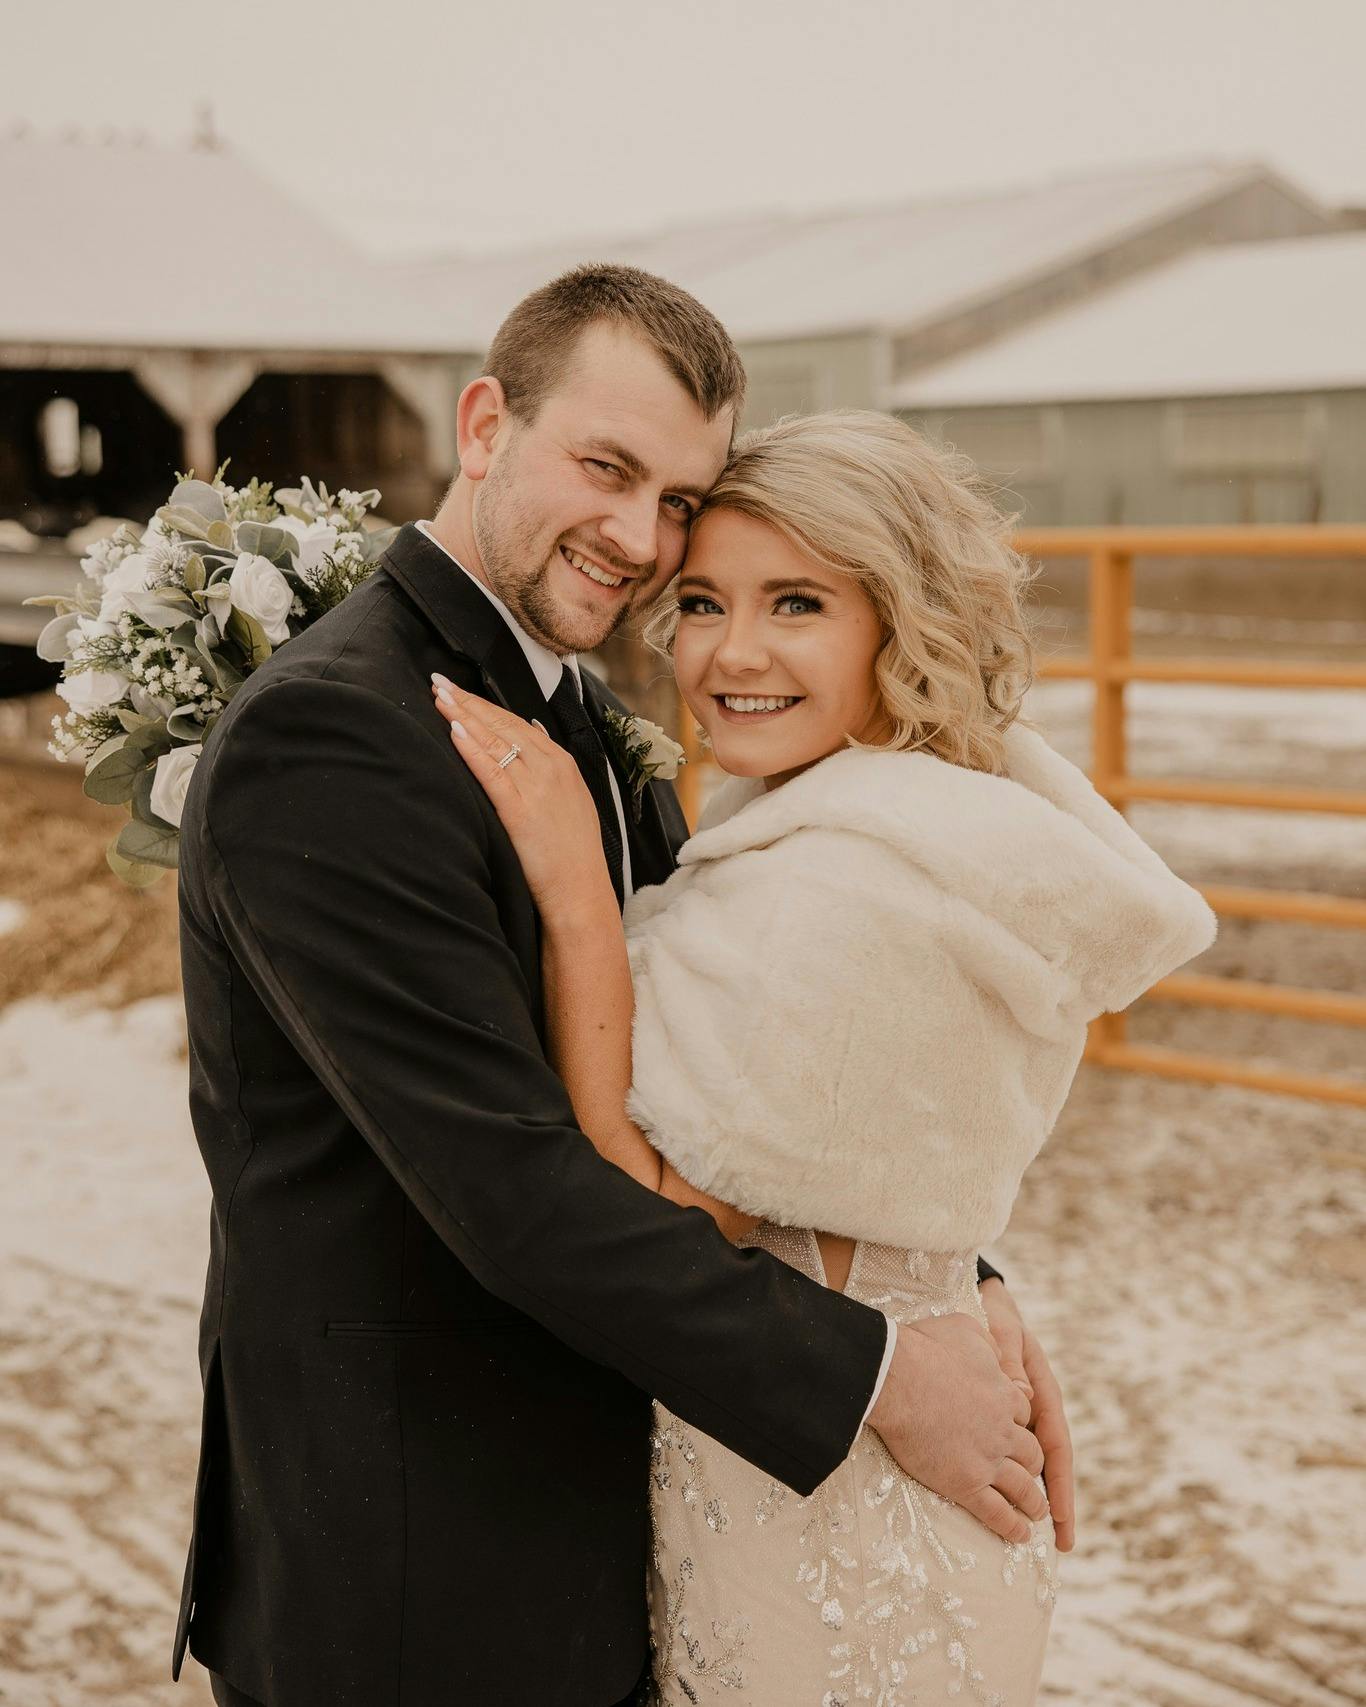 Picture of Bride and groom smiling on a ranch